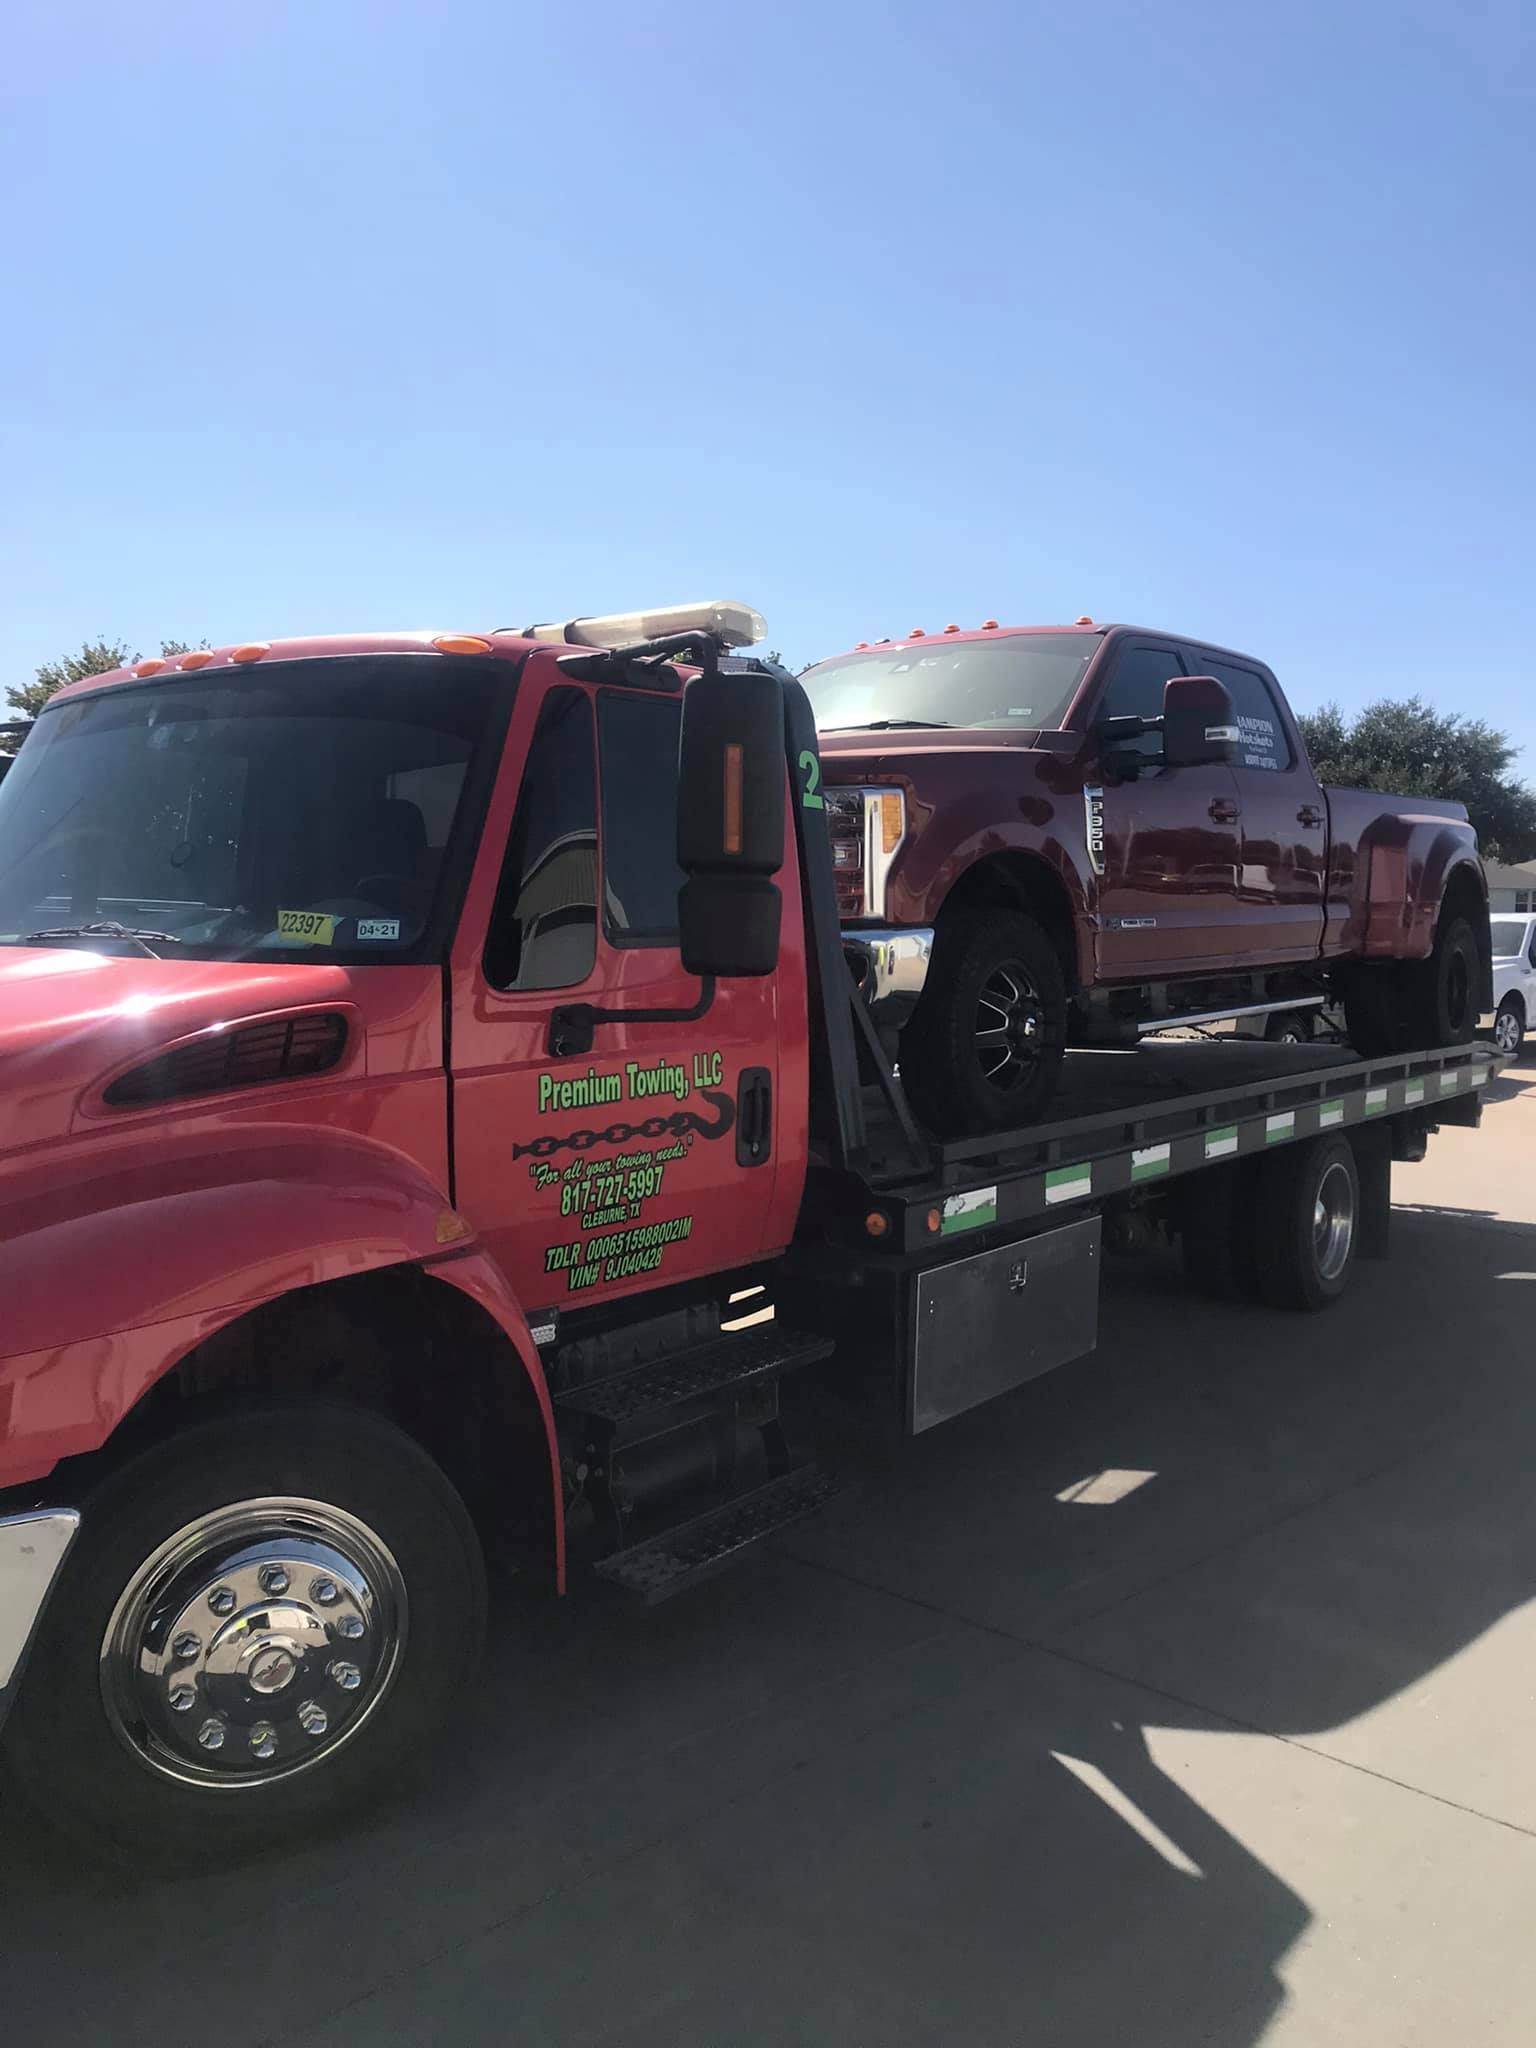 Premium towing loaded with a pickup truck